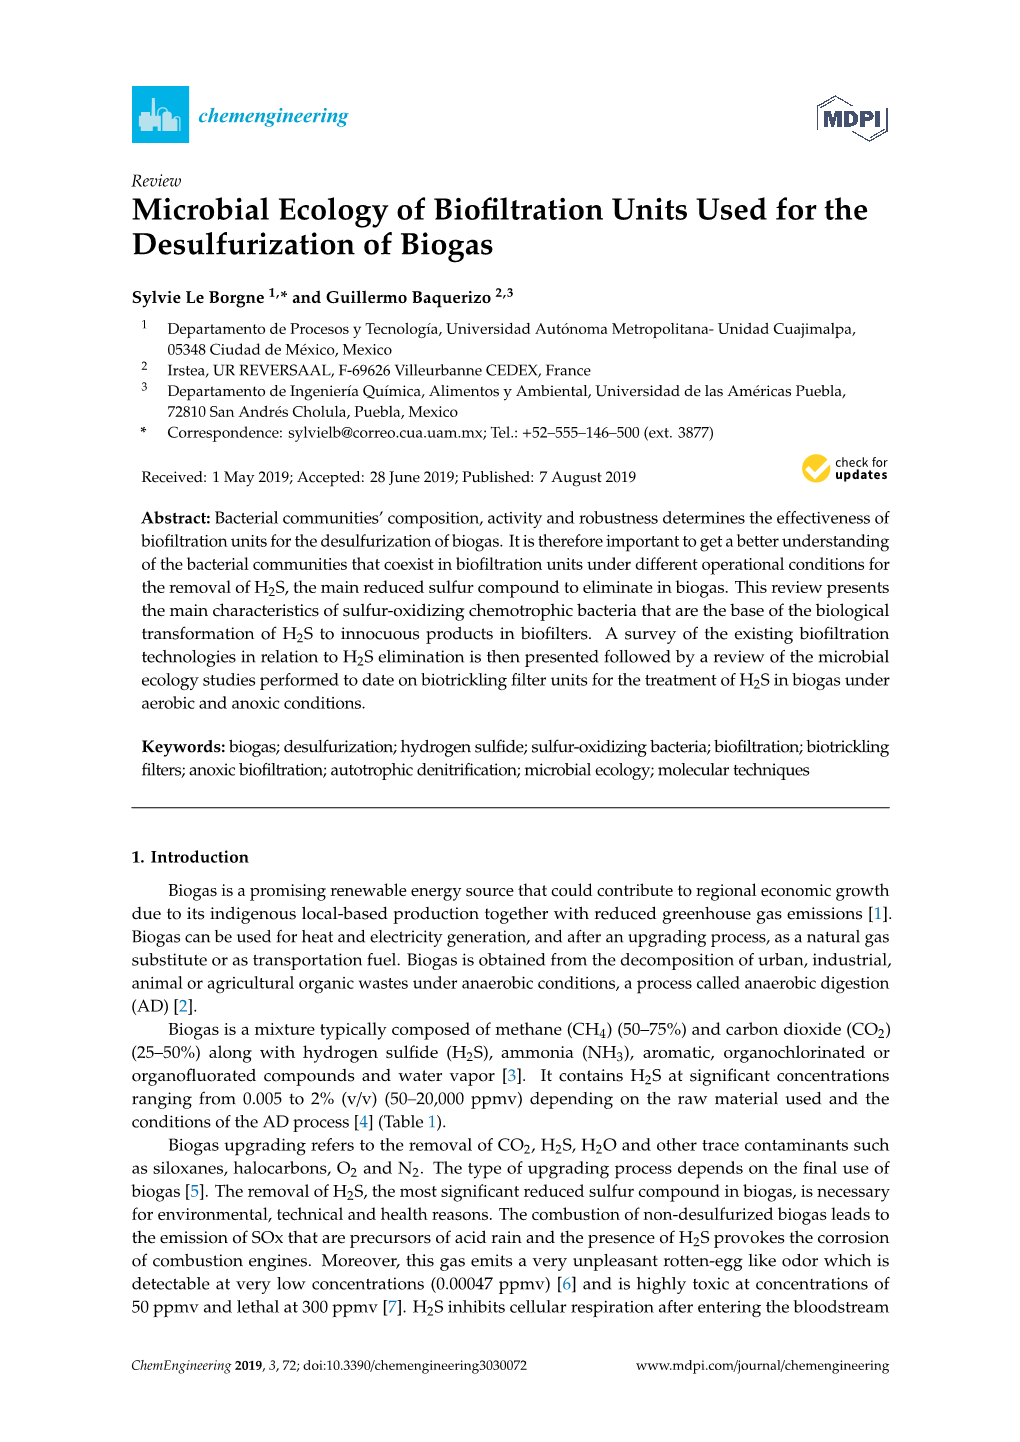 Microbial Ecology of Biofiltration Units Used for the Desulfurization of Biogas